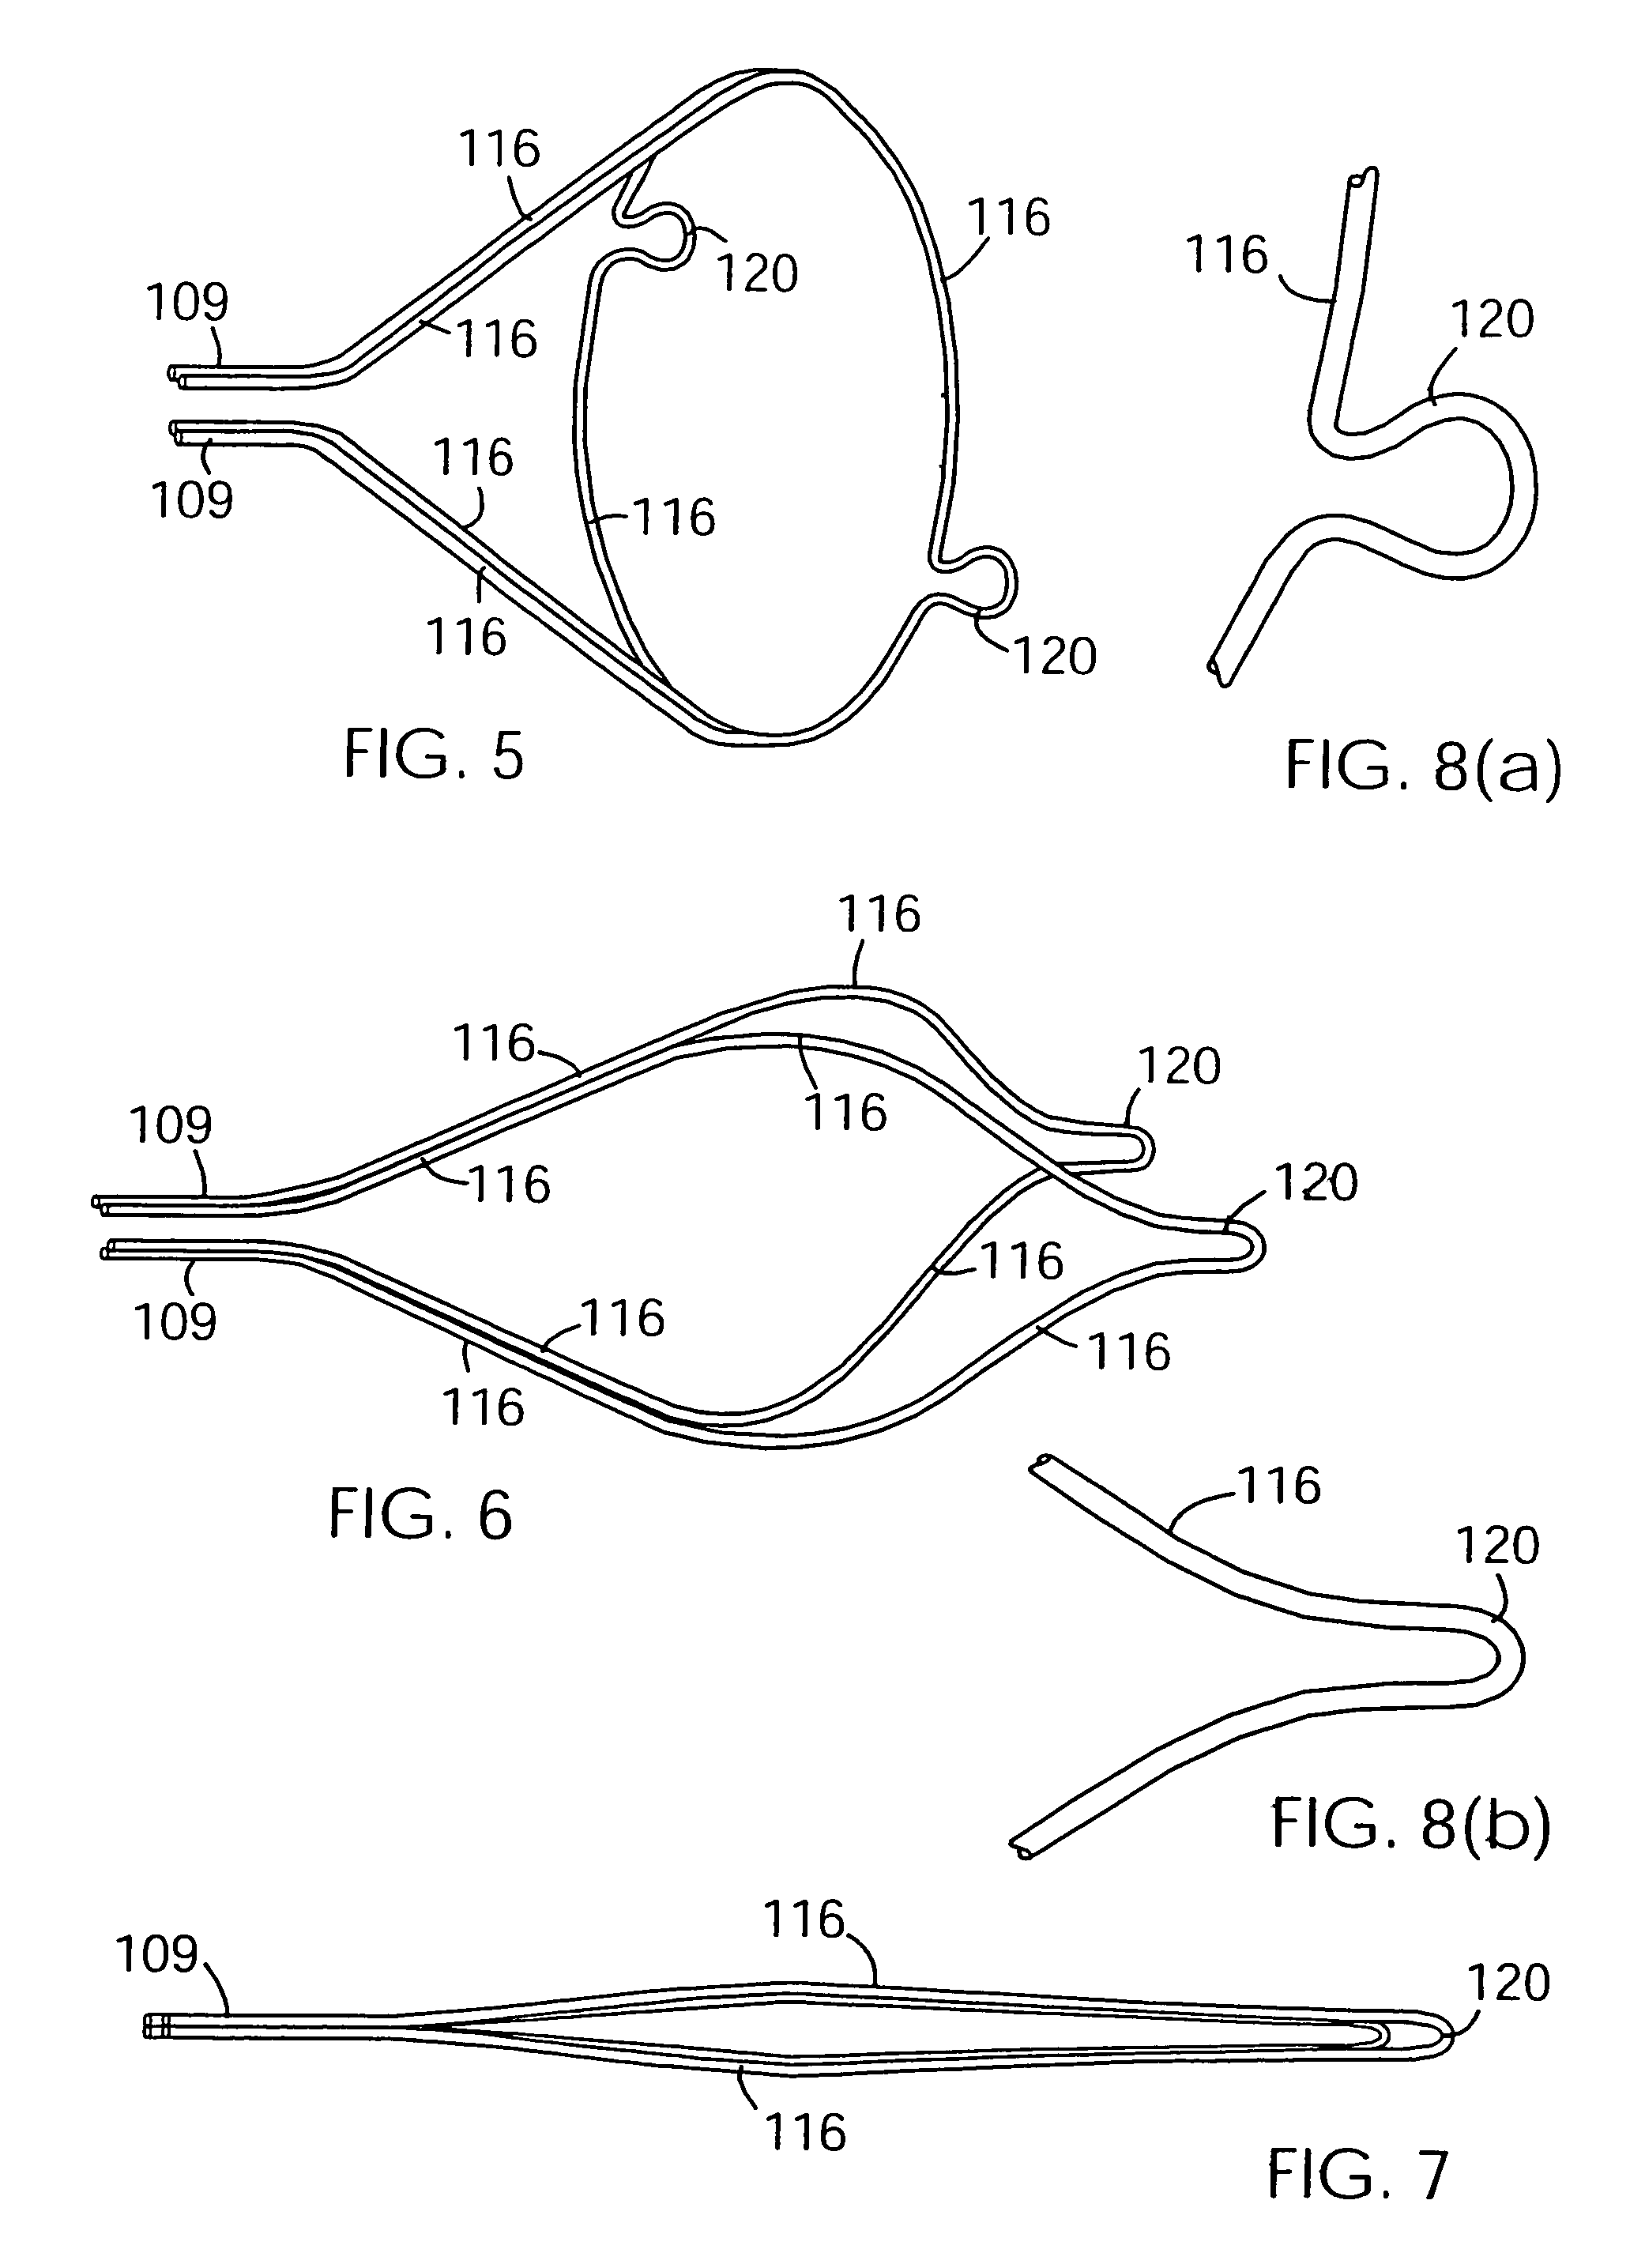 Support frame for an embolic protection device